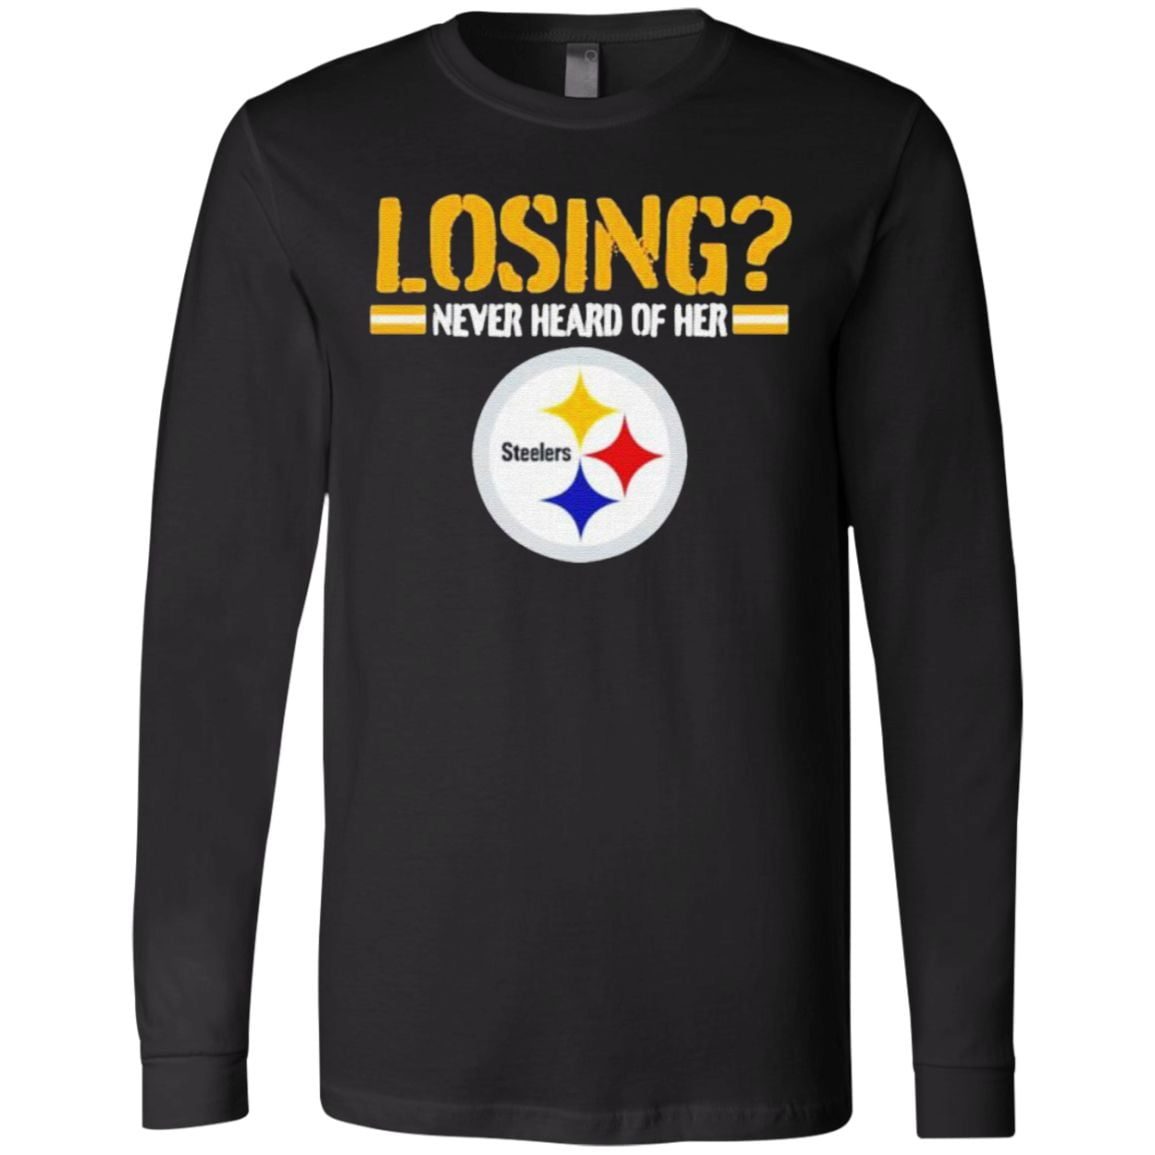 Losing never heard of her Pittsburgh Steelers t shirt